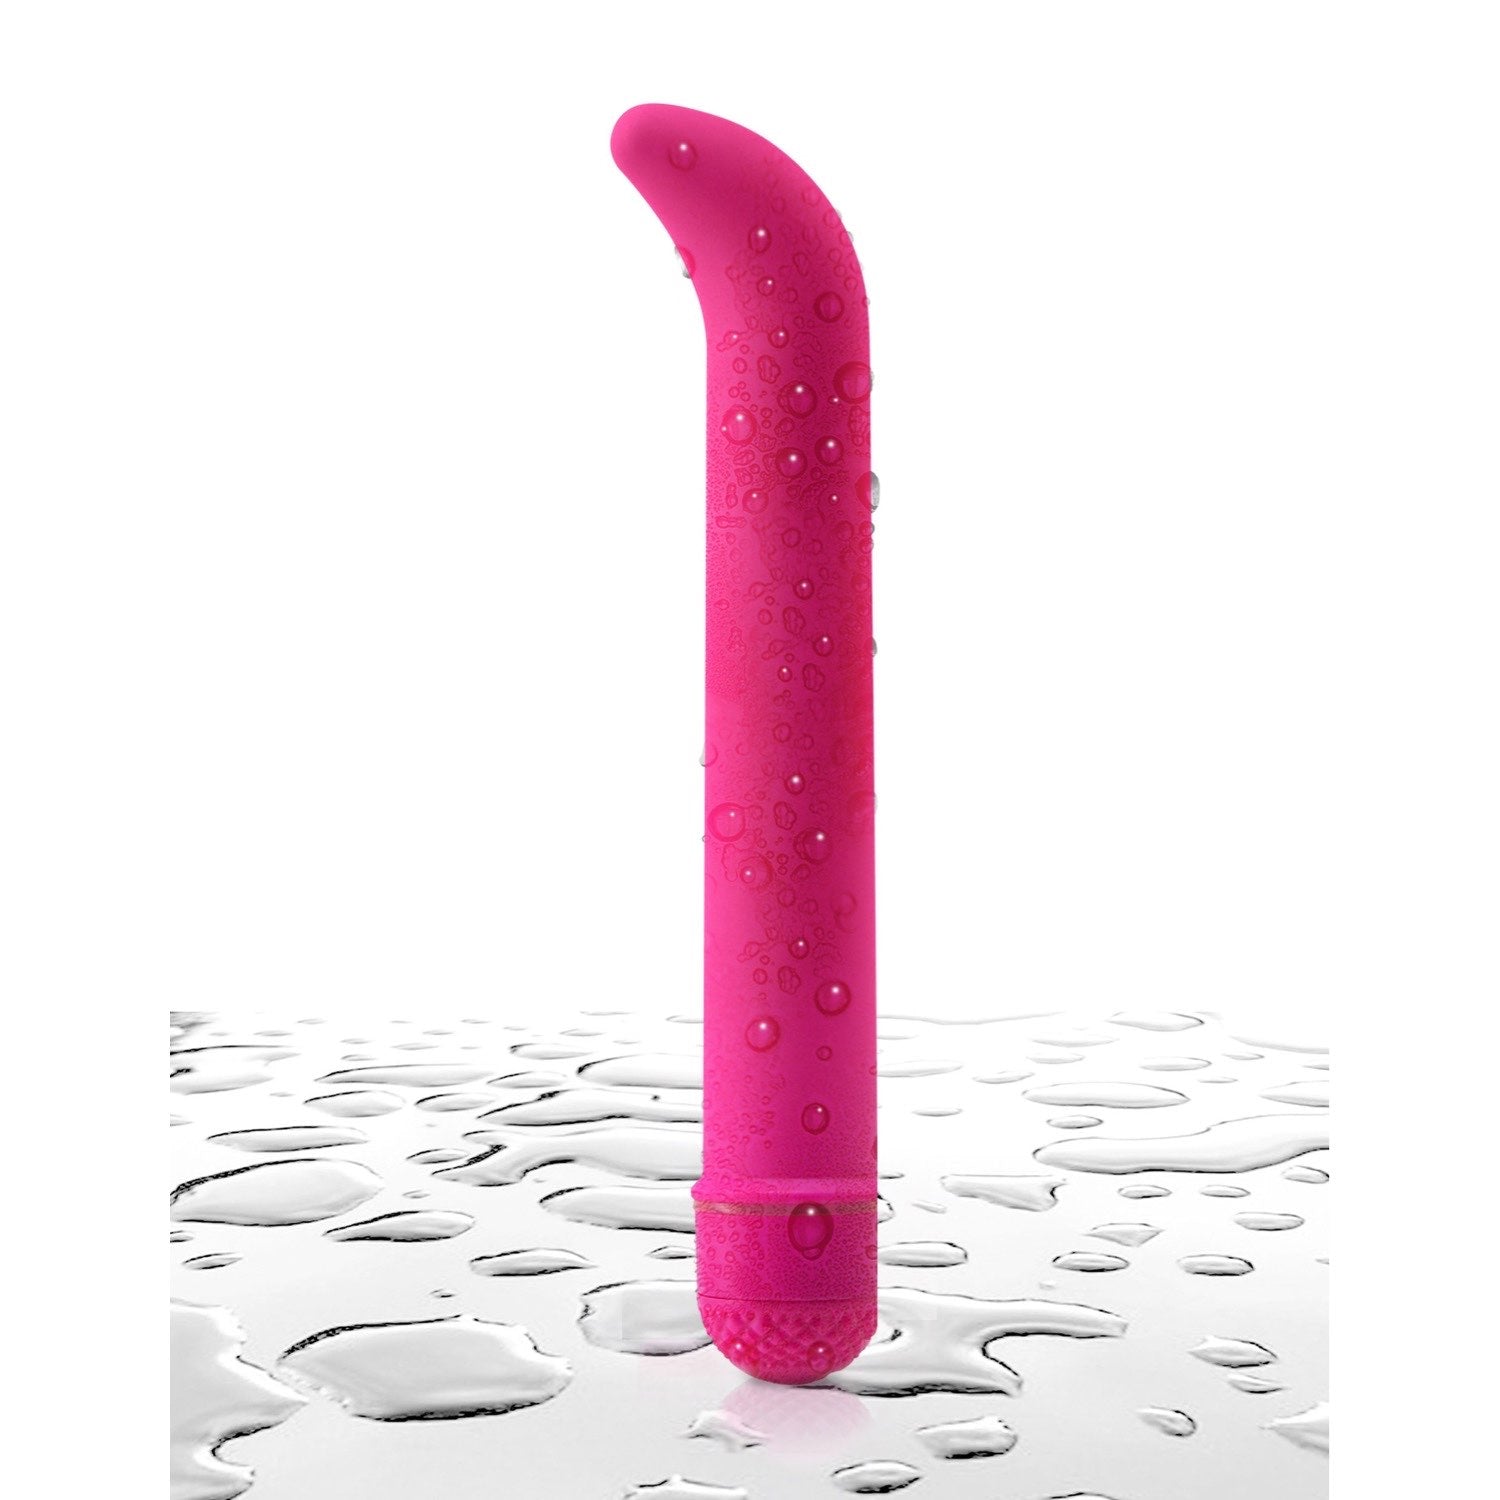 Luv Touch Neon G-spot - Pink 17.75 cm (7&quot;) Vibrator by Pipedream